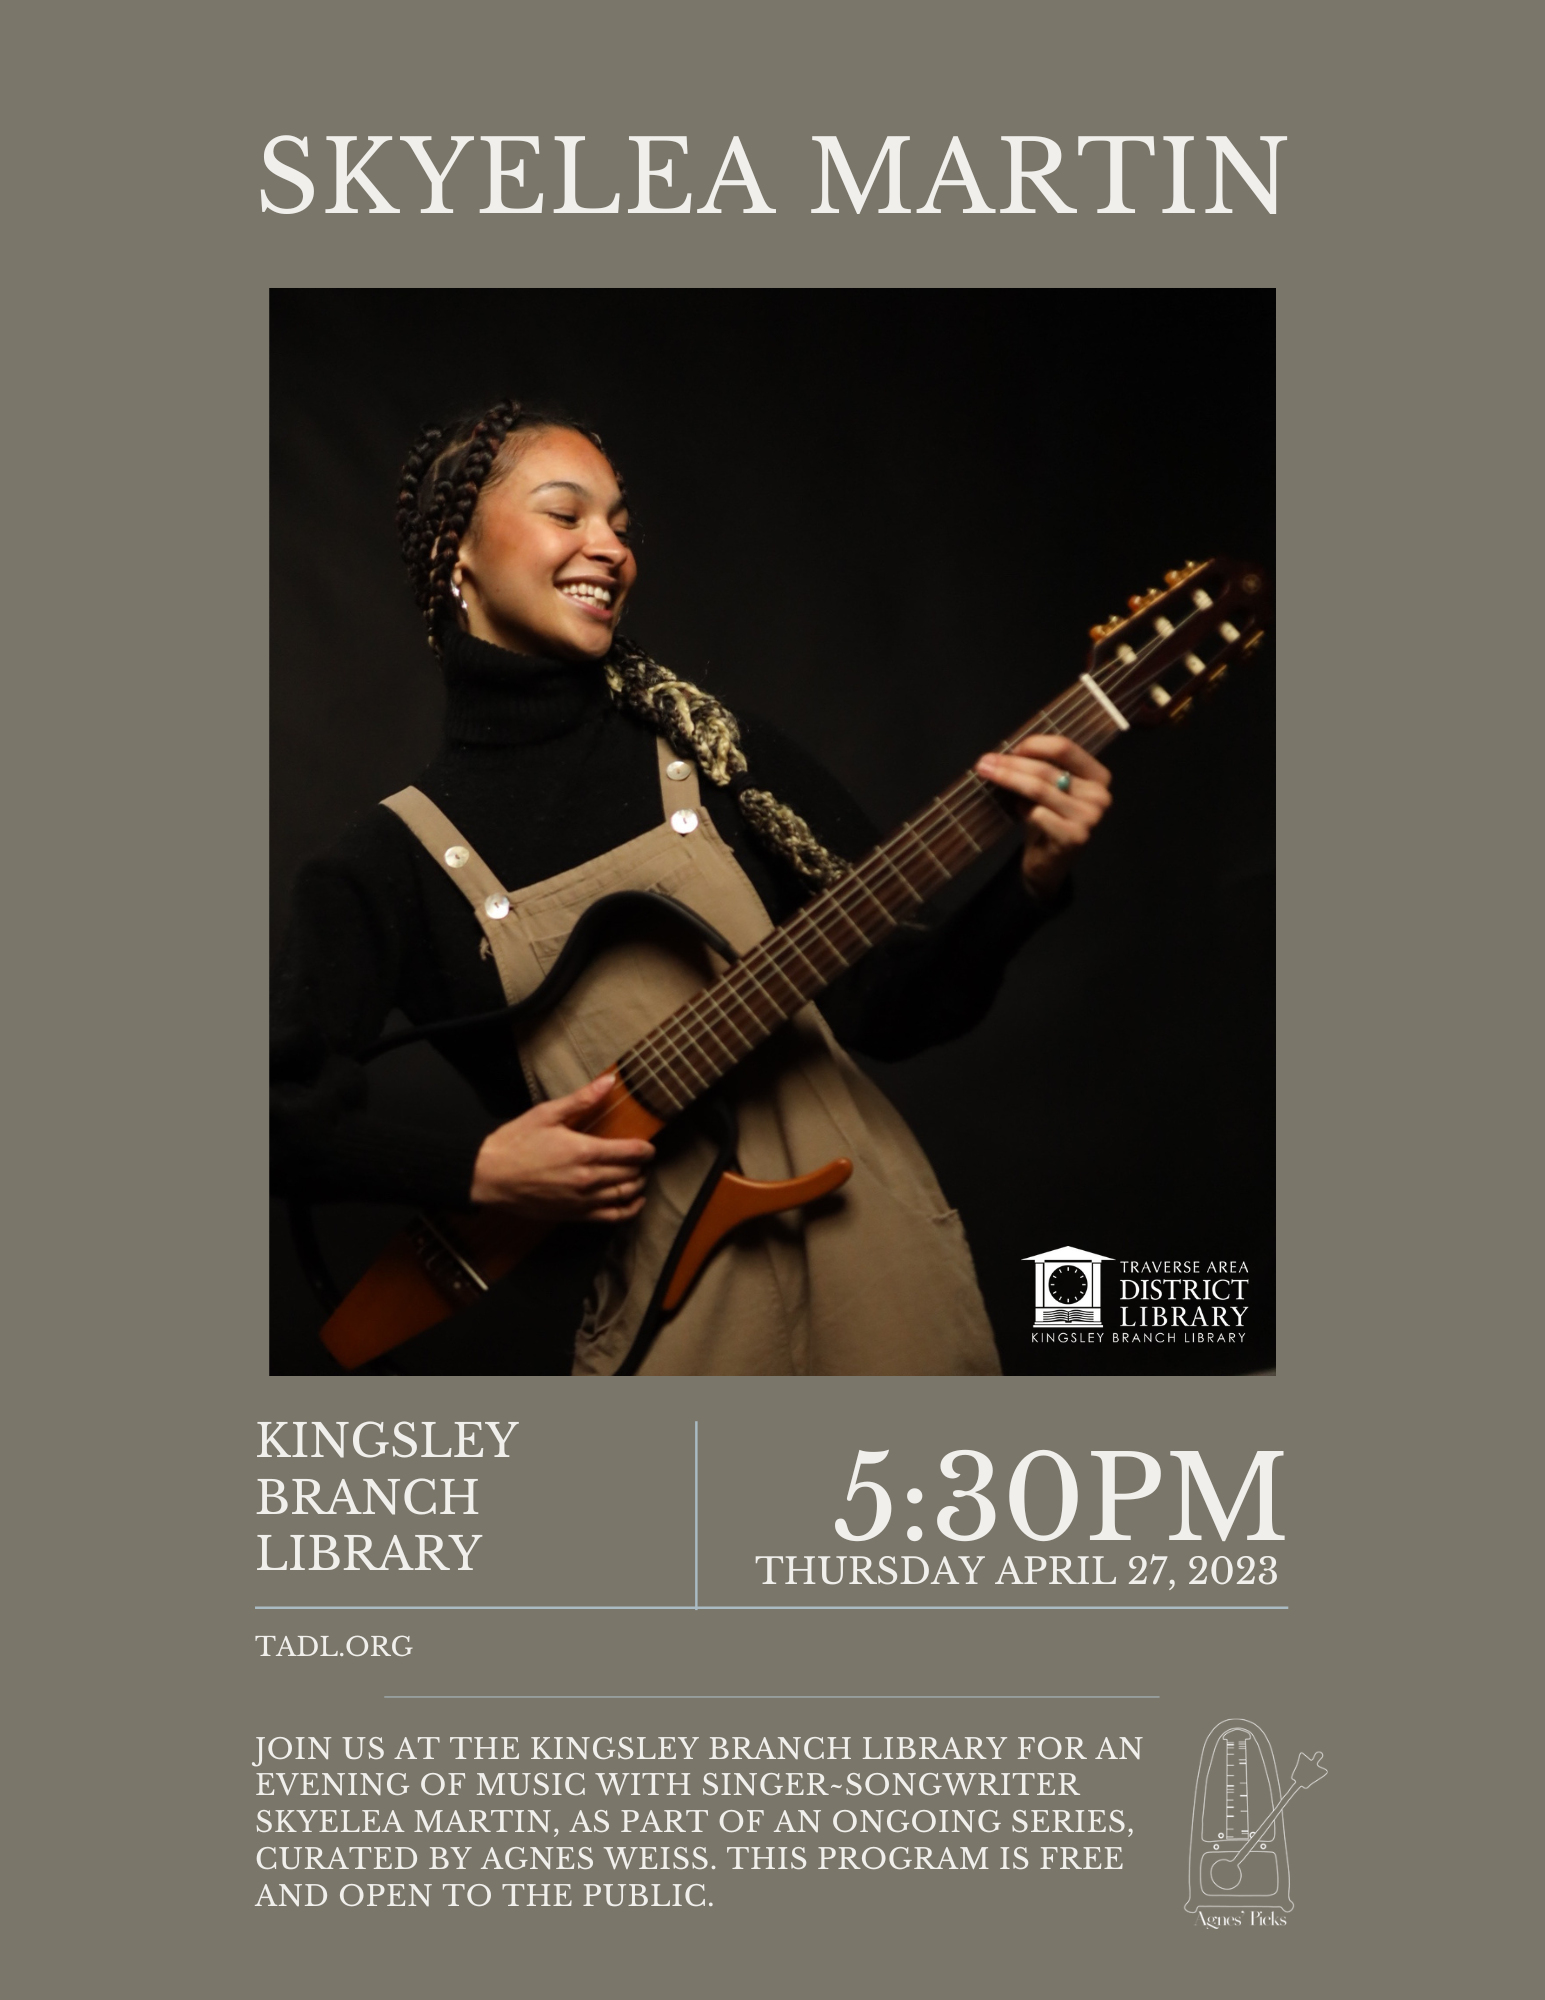 Image of the musician Skyelea Martin playing a guitar. Text reads "Skyelea Martin at the Kingsley Branch Library, 5:30pm on Thursday, April 27th."